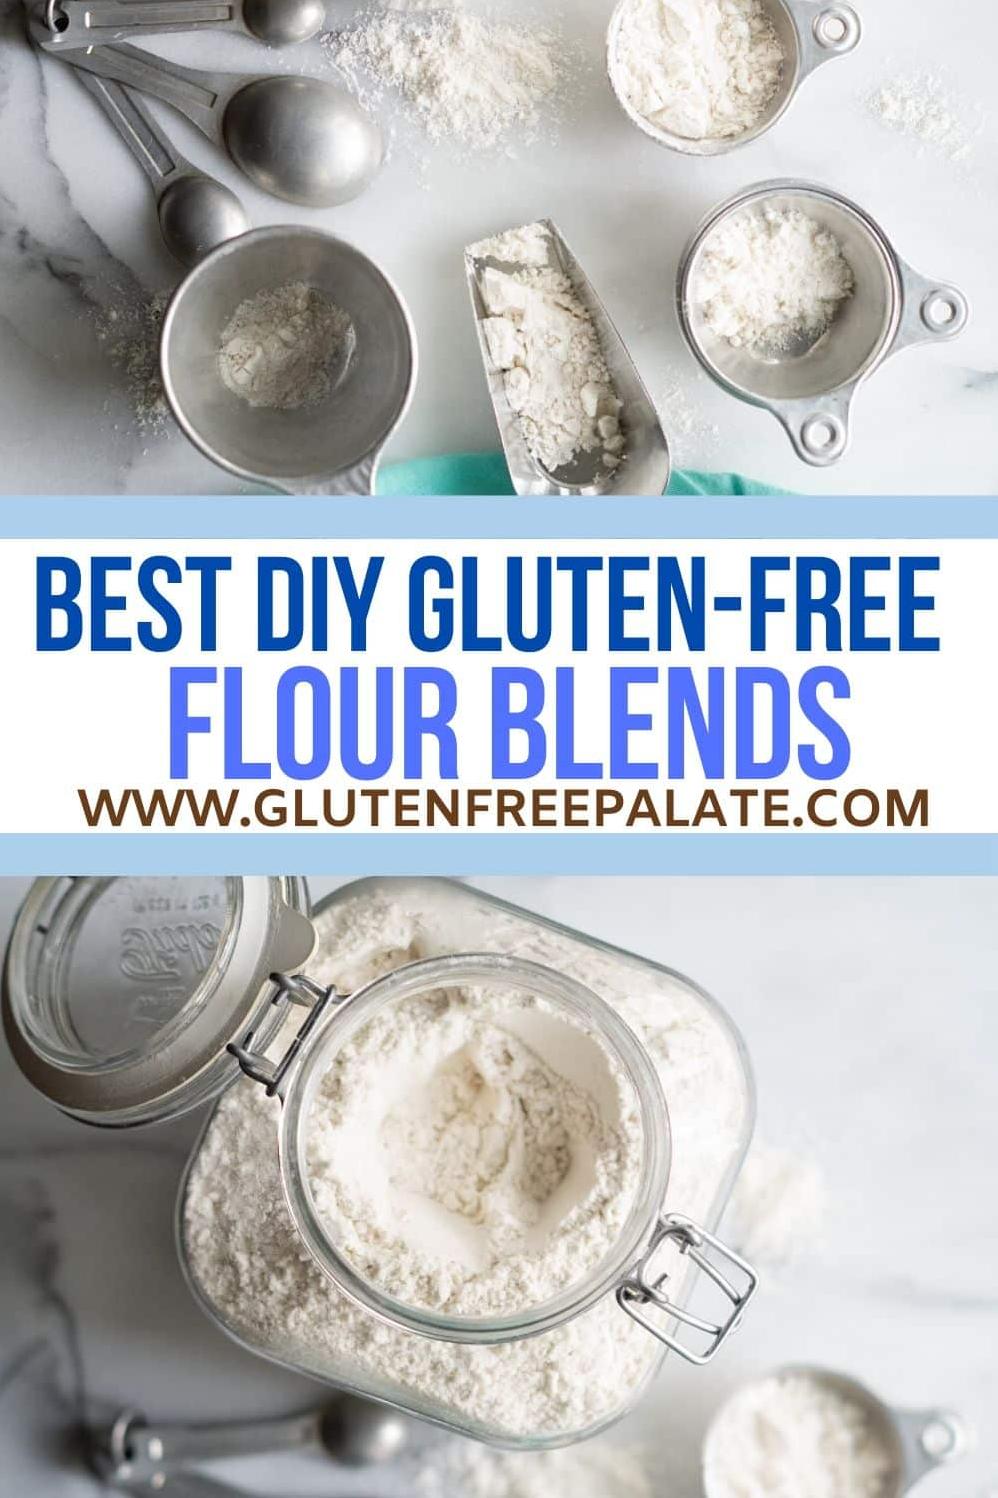  This versatile flour can be used in a variety of gluten-free recipes.